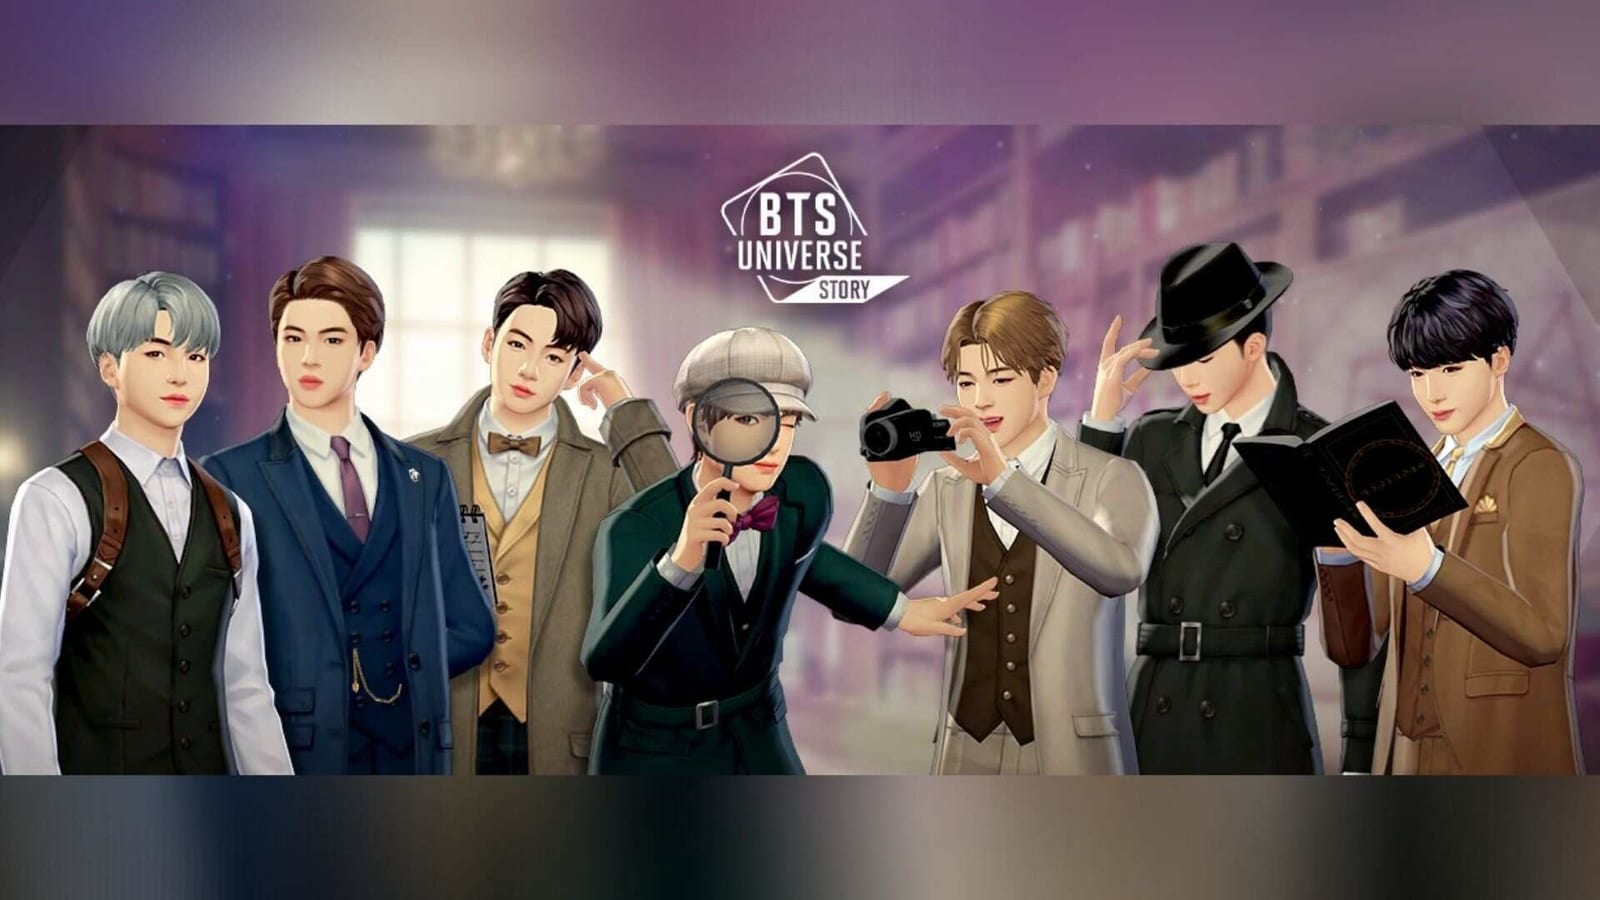 BTS Universe Story game launched on Android, iOS